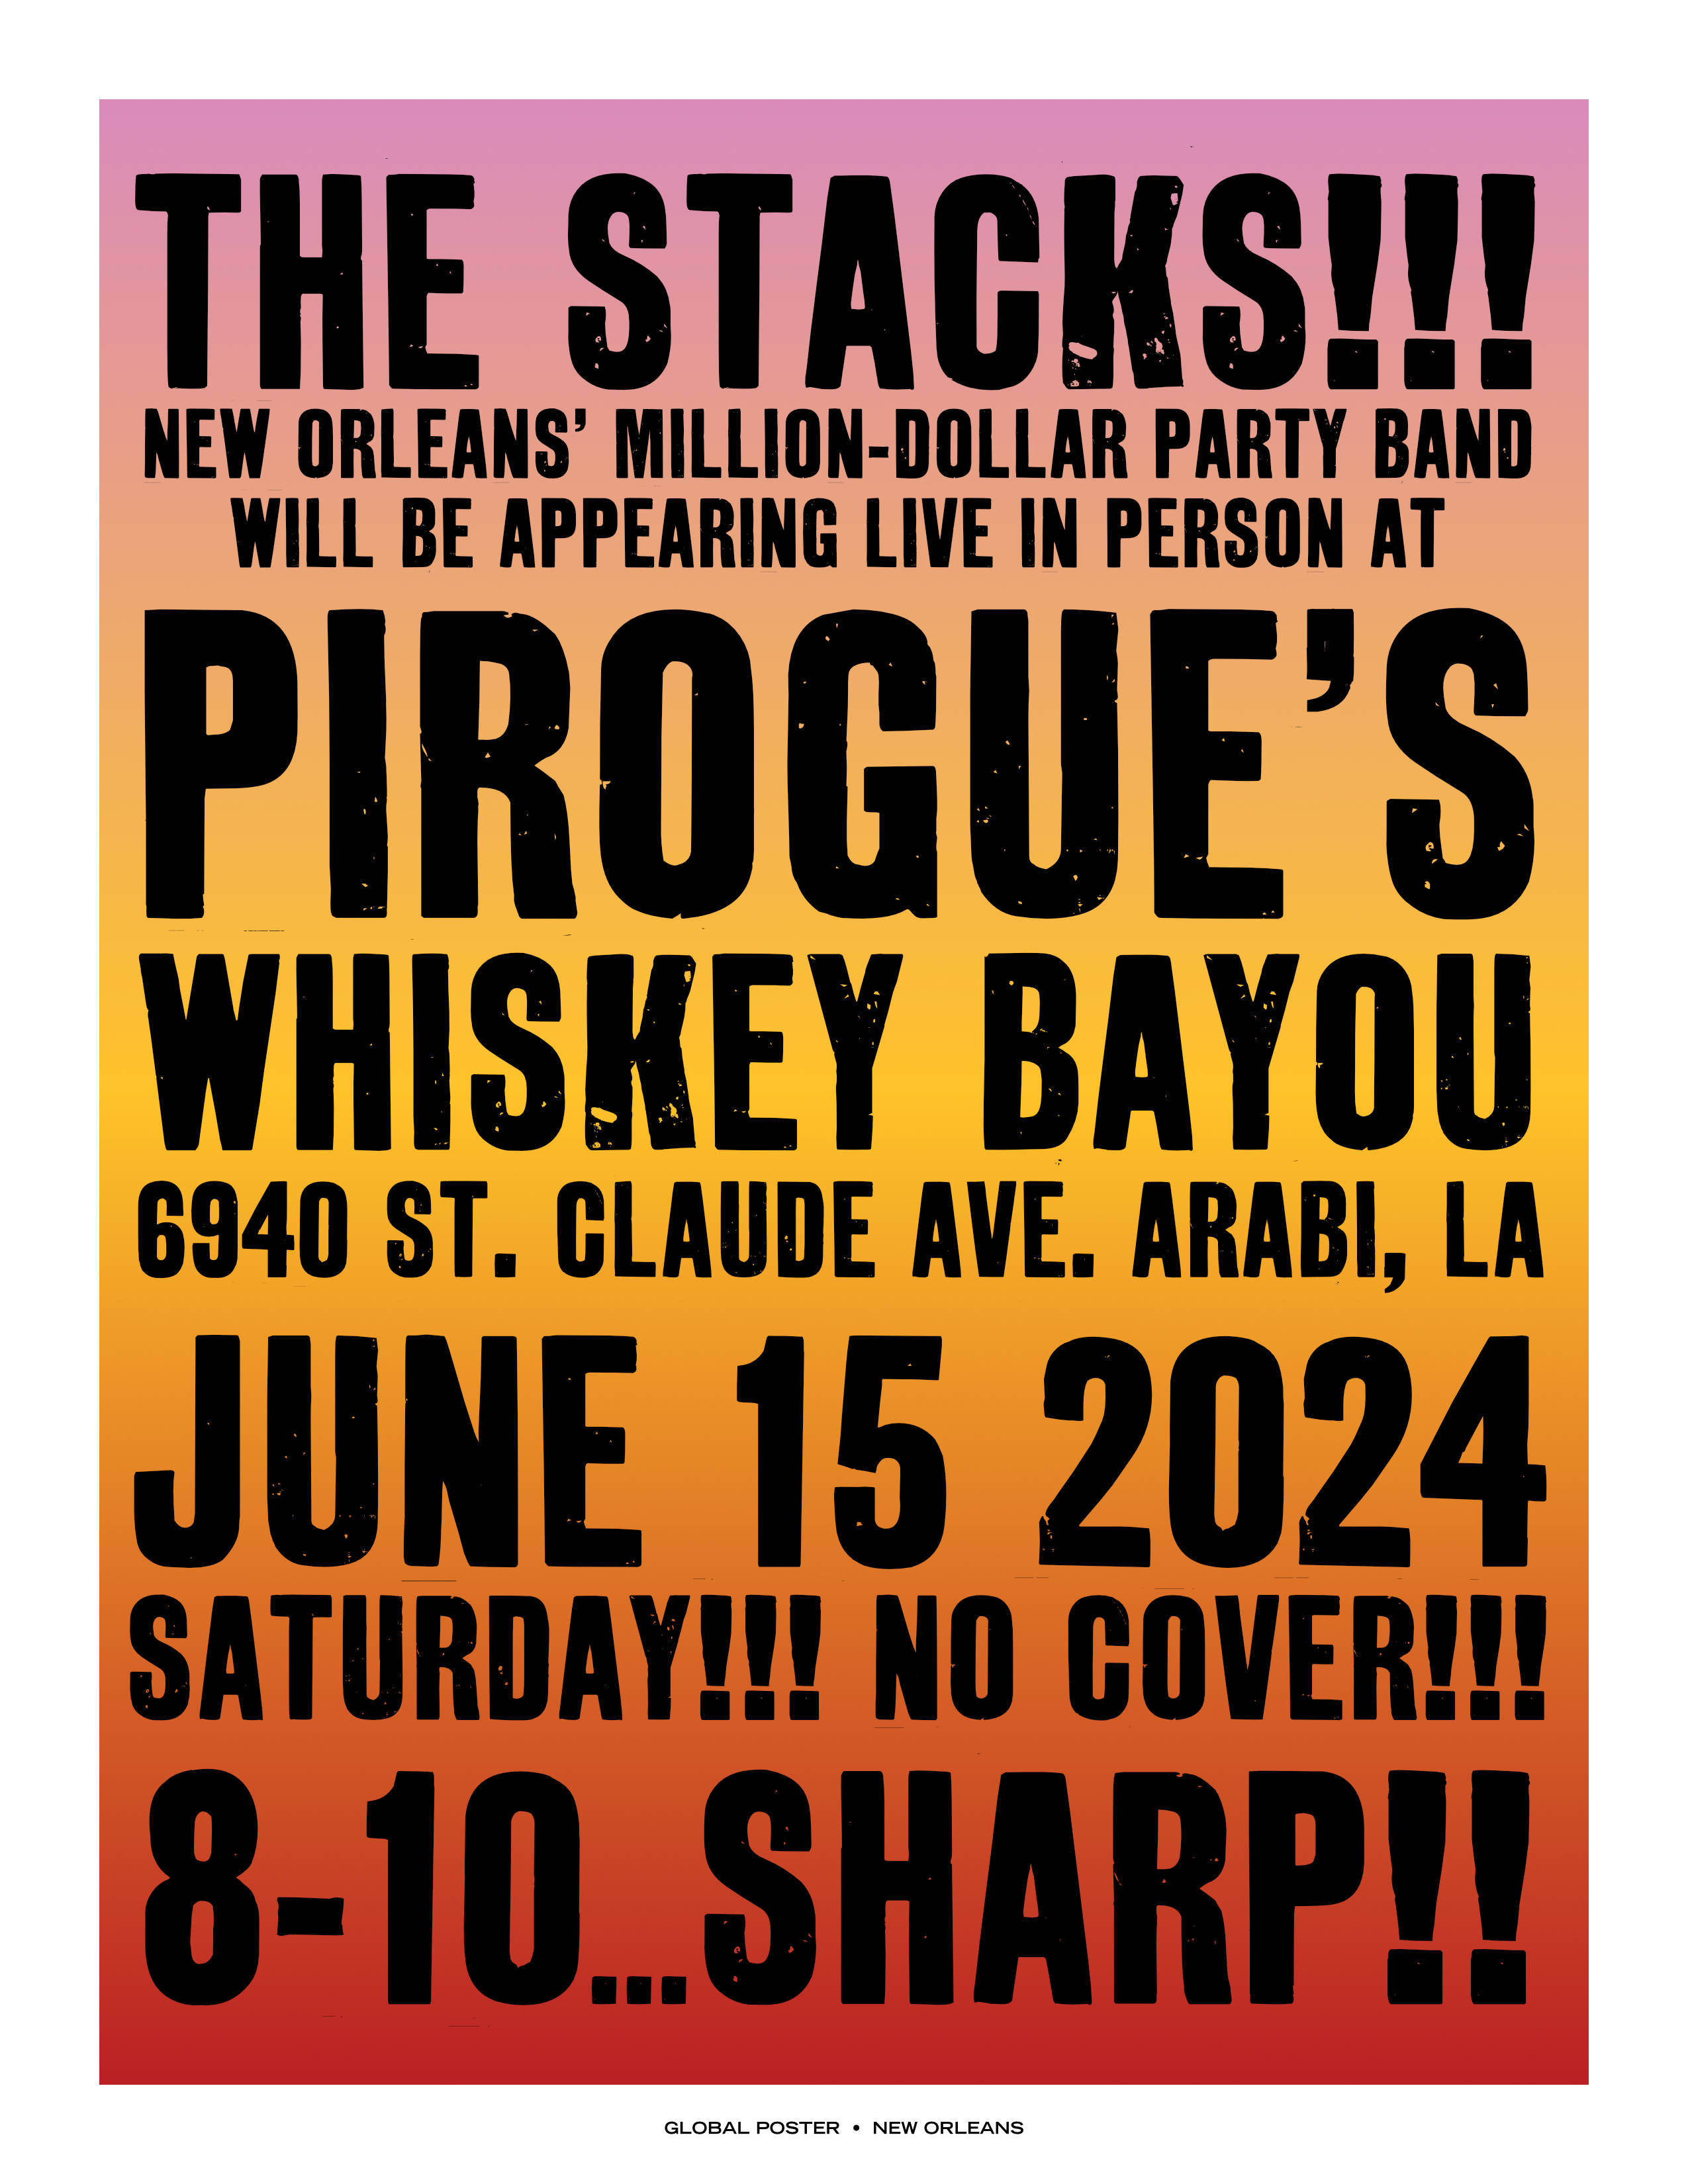 The Stacks New Orleans: Pirogue's Whiskey Bayou